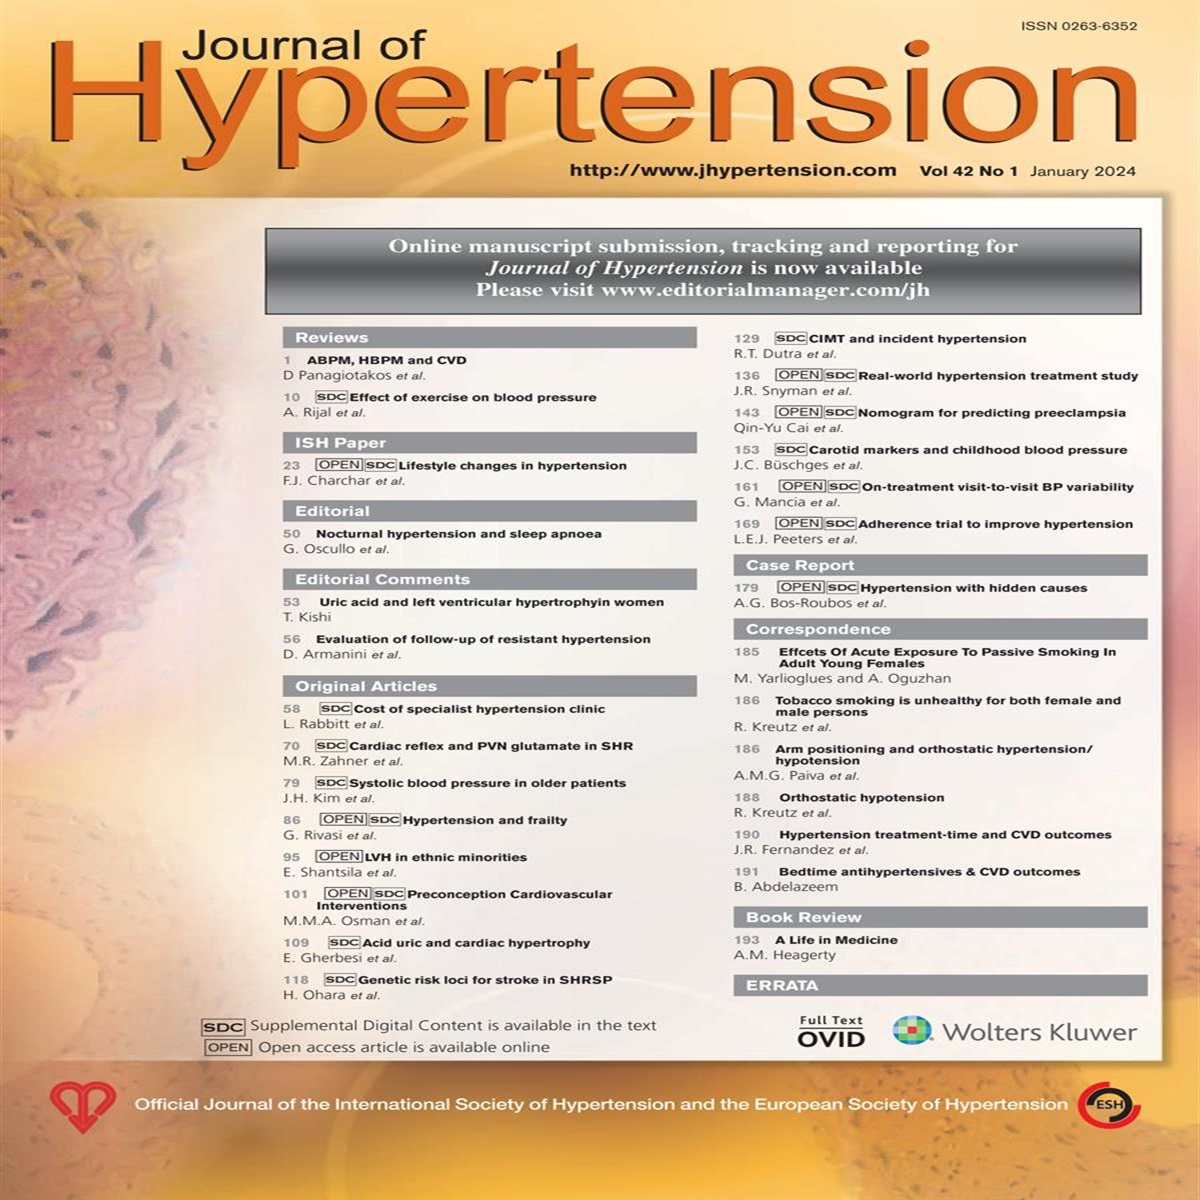 Gender differences in the association of serum uric acid with left ventricular hypertrophy should be focused